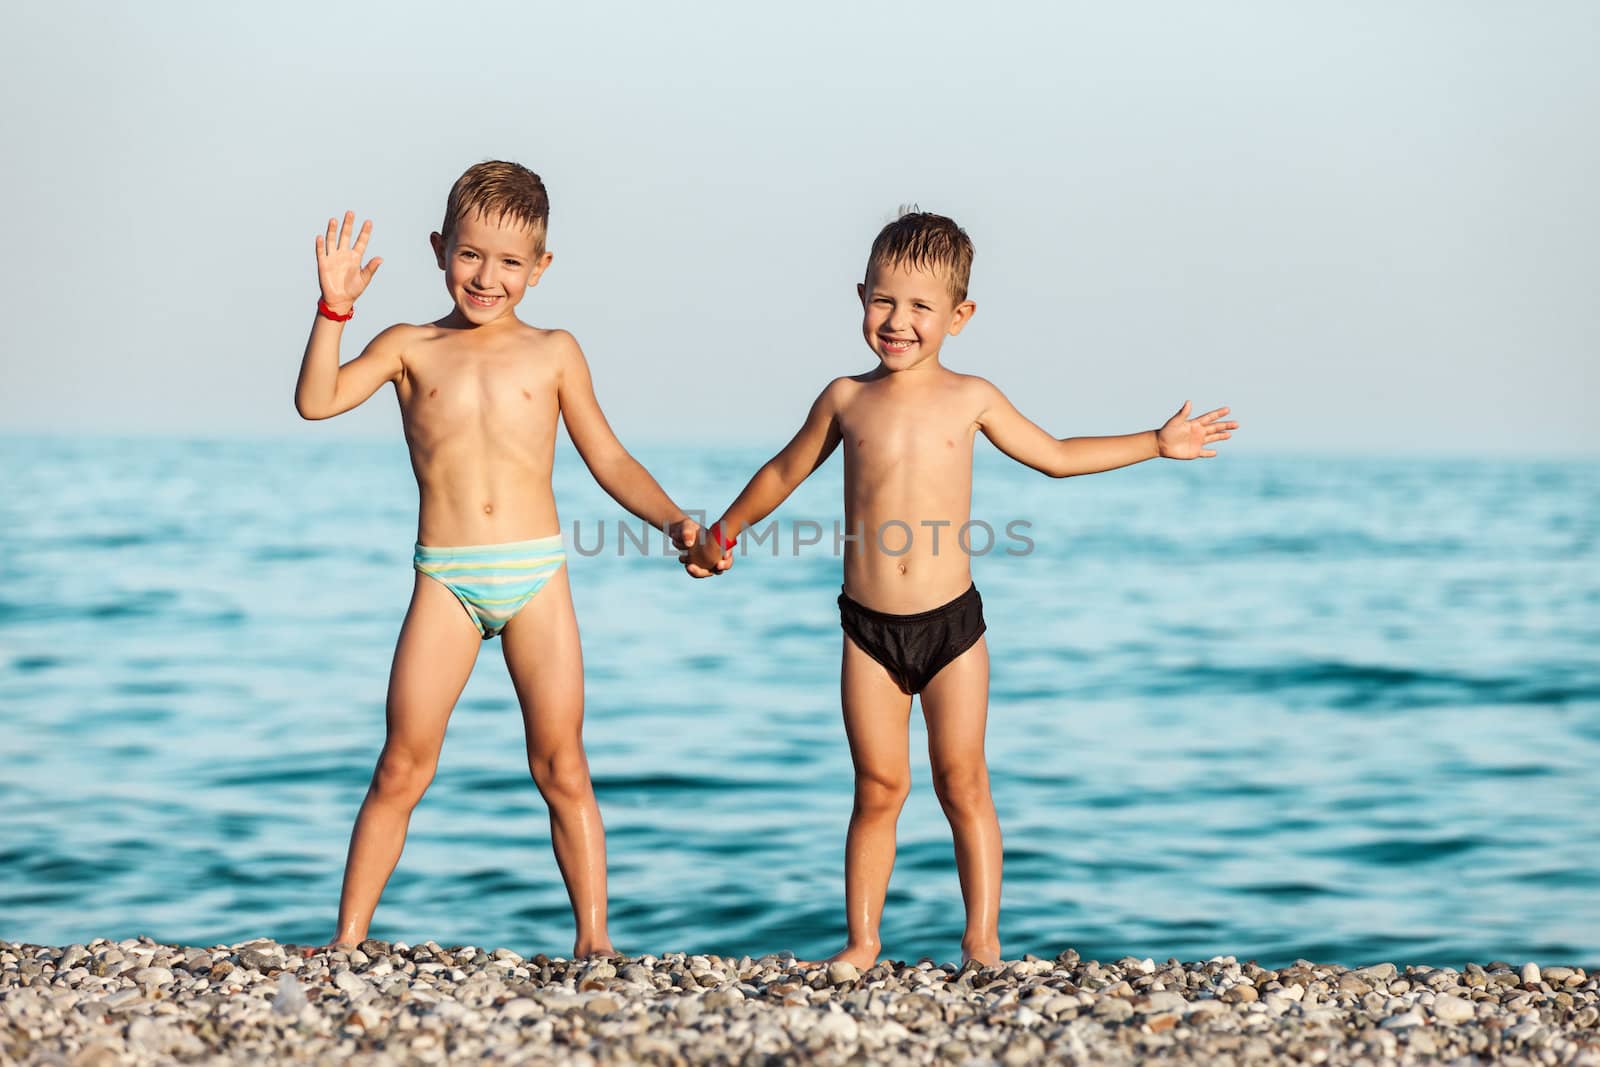 Summer vacations - two little child boy brothers playing on blue sea sand beach